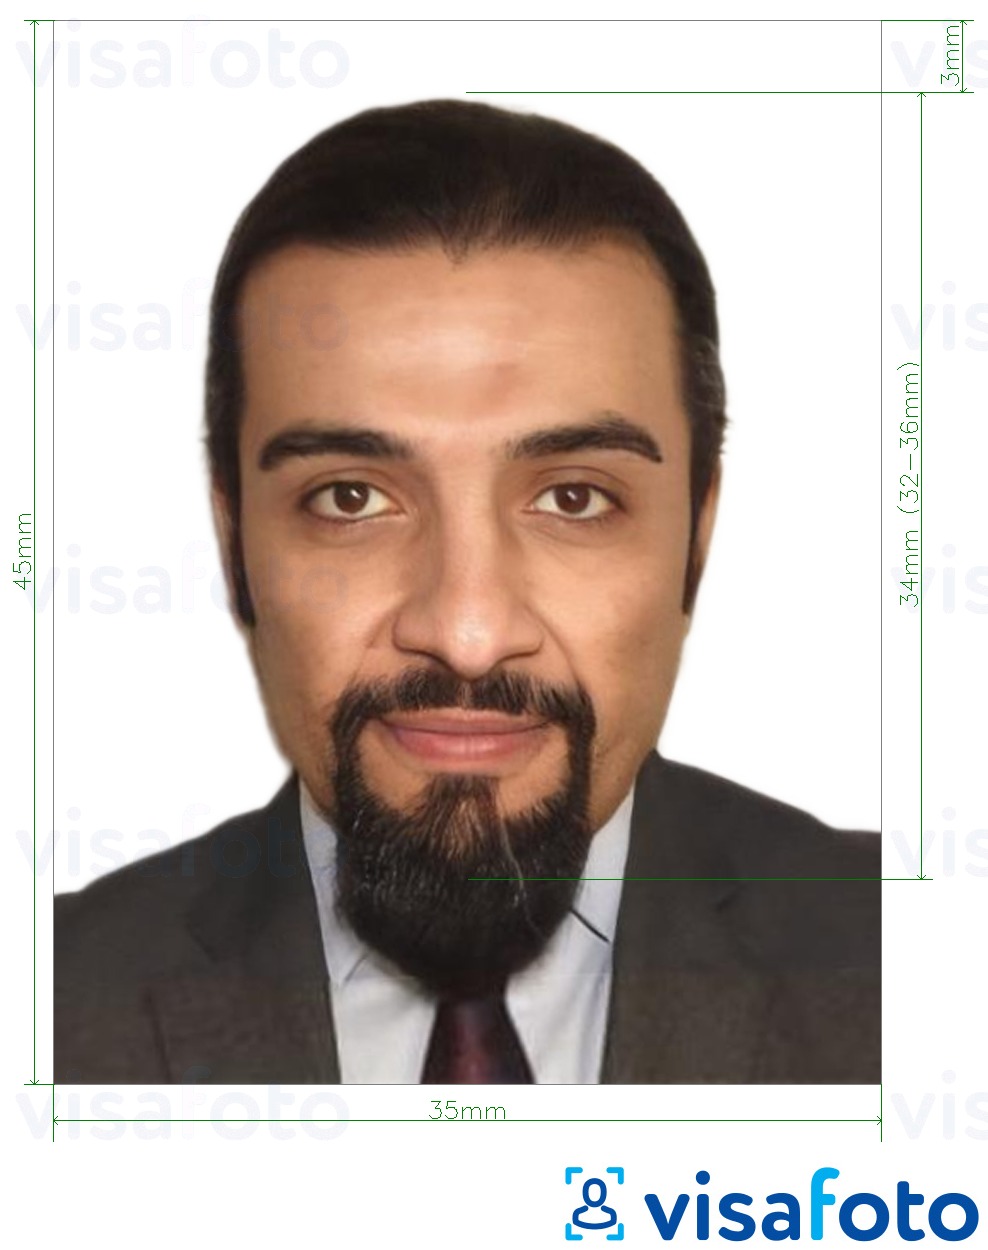 Example of photo for Lebanese work permit 3.5x4.5 cm (35x45 mm) with exact size specification